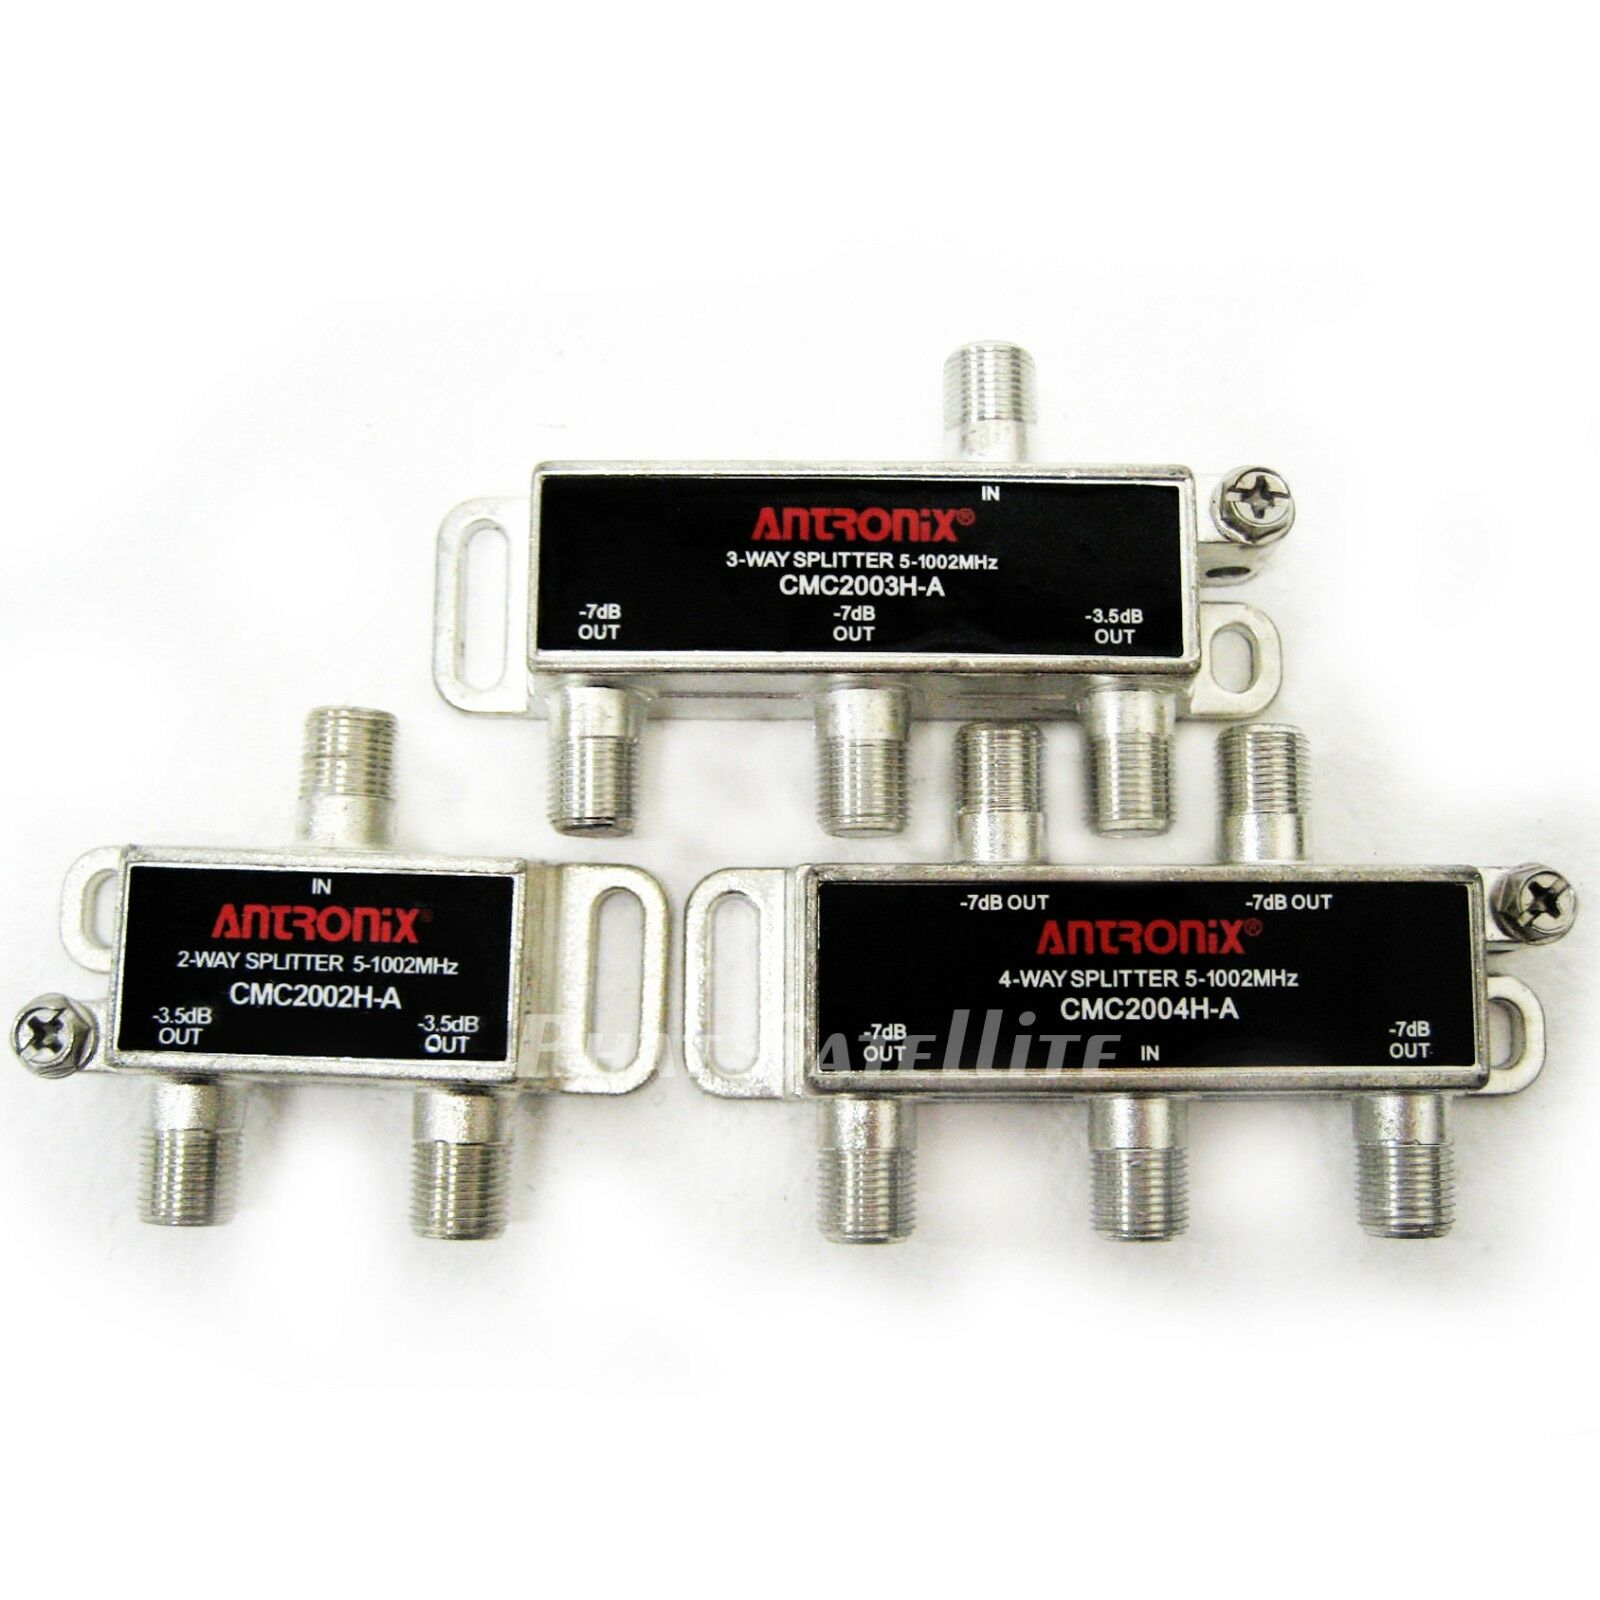 2, 3, 4, 6, 8 Way Splitters For Rg6 Rg59 Rg8 Rg11 Coaxial Cables